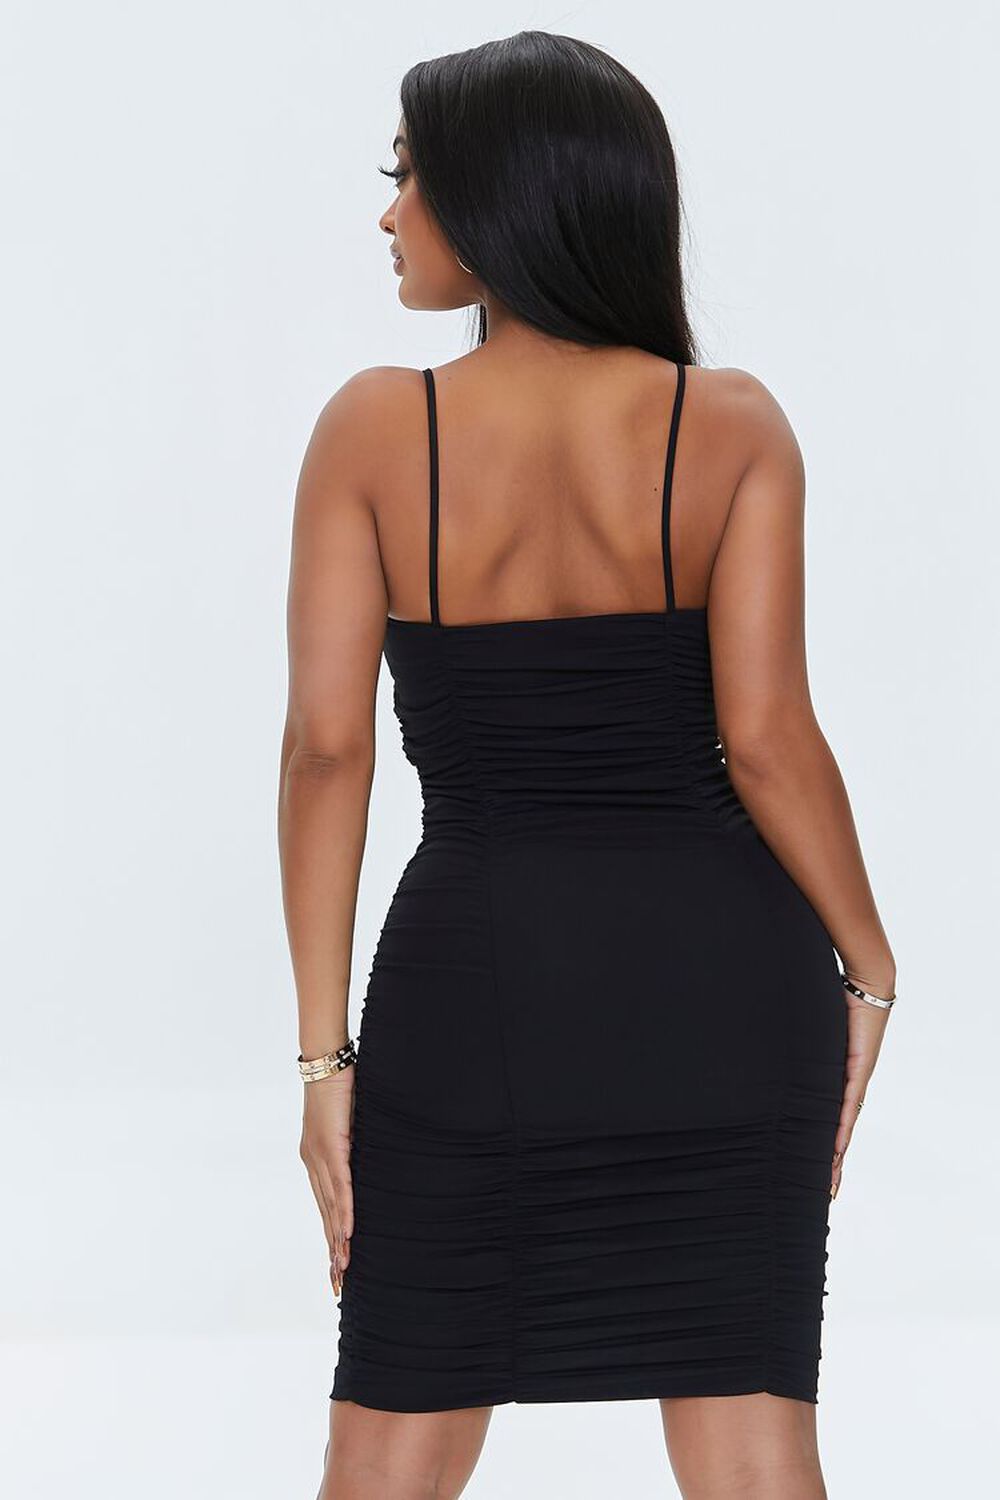 Ruched Cutout Bodycon Dress, image 3